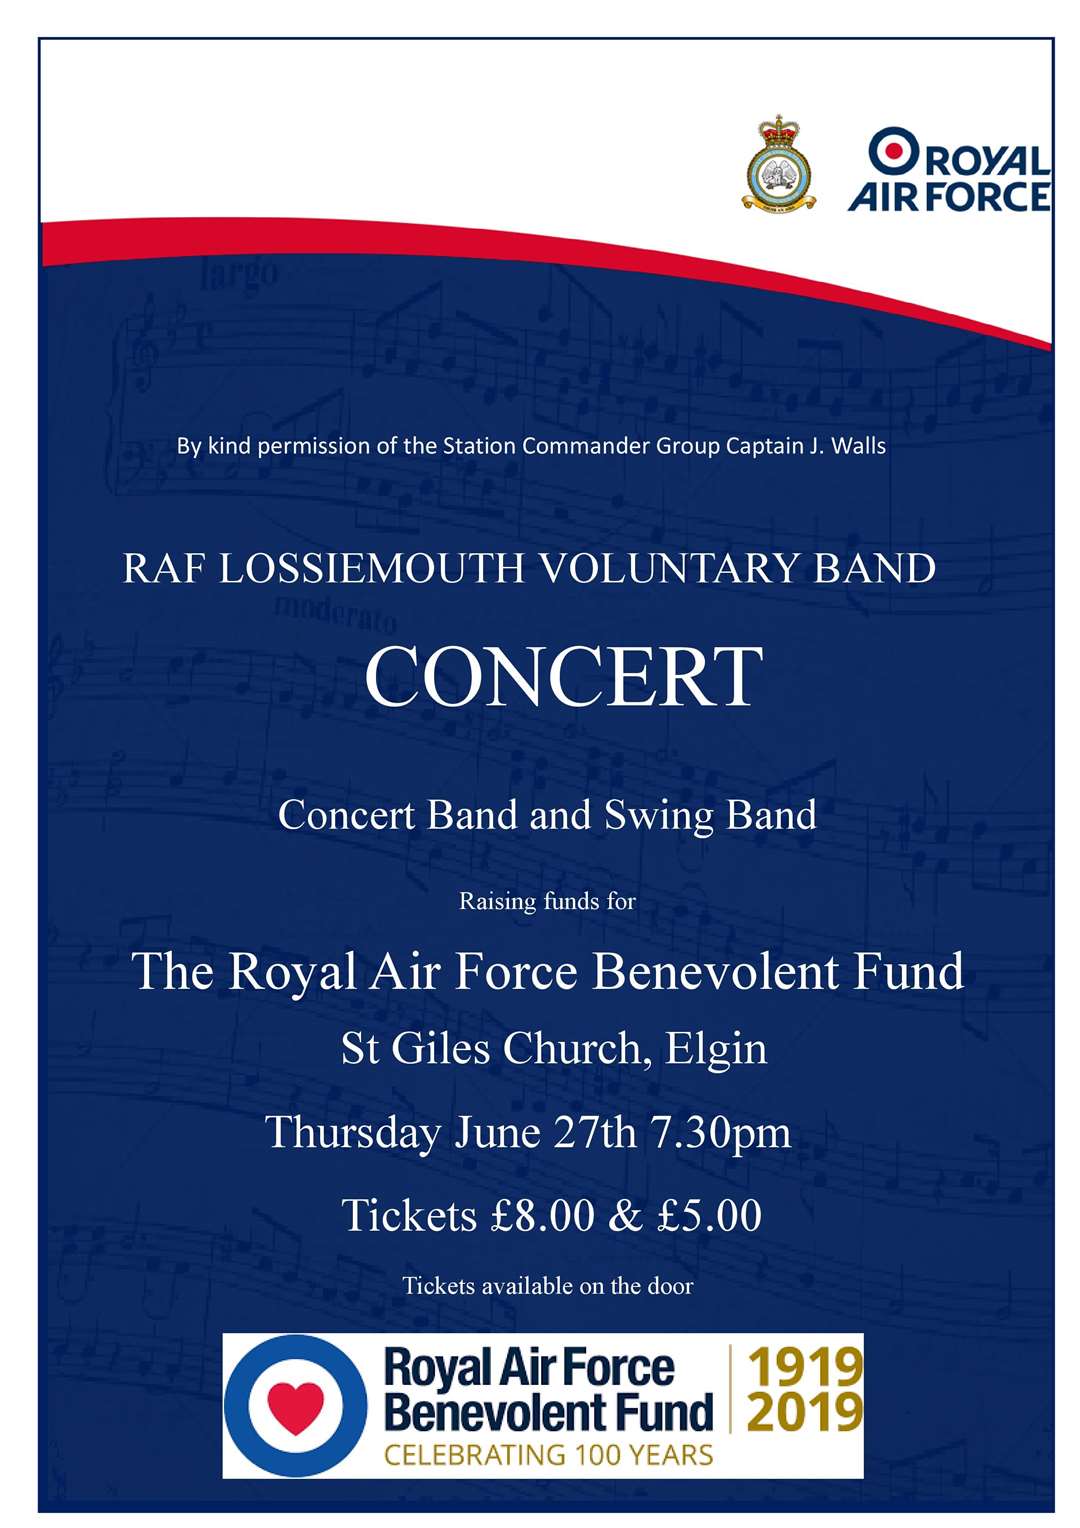 Poster for St Giles Concert - RAF Voluntary Band